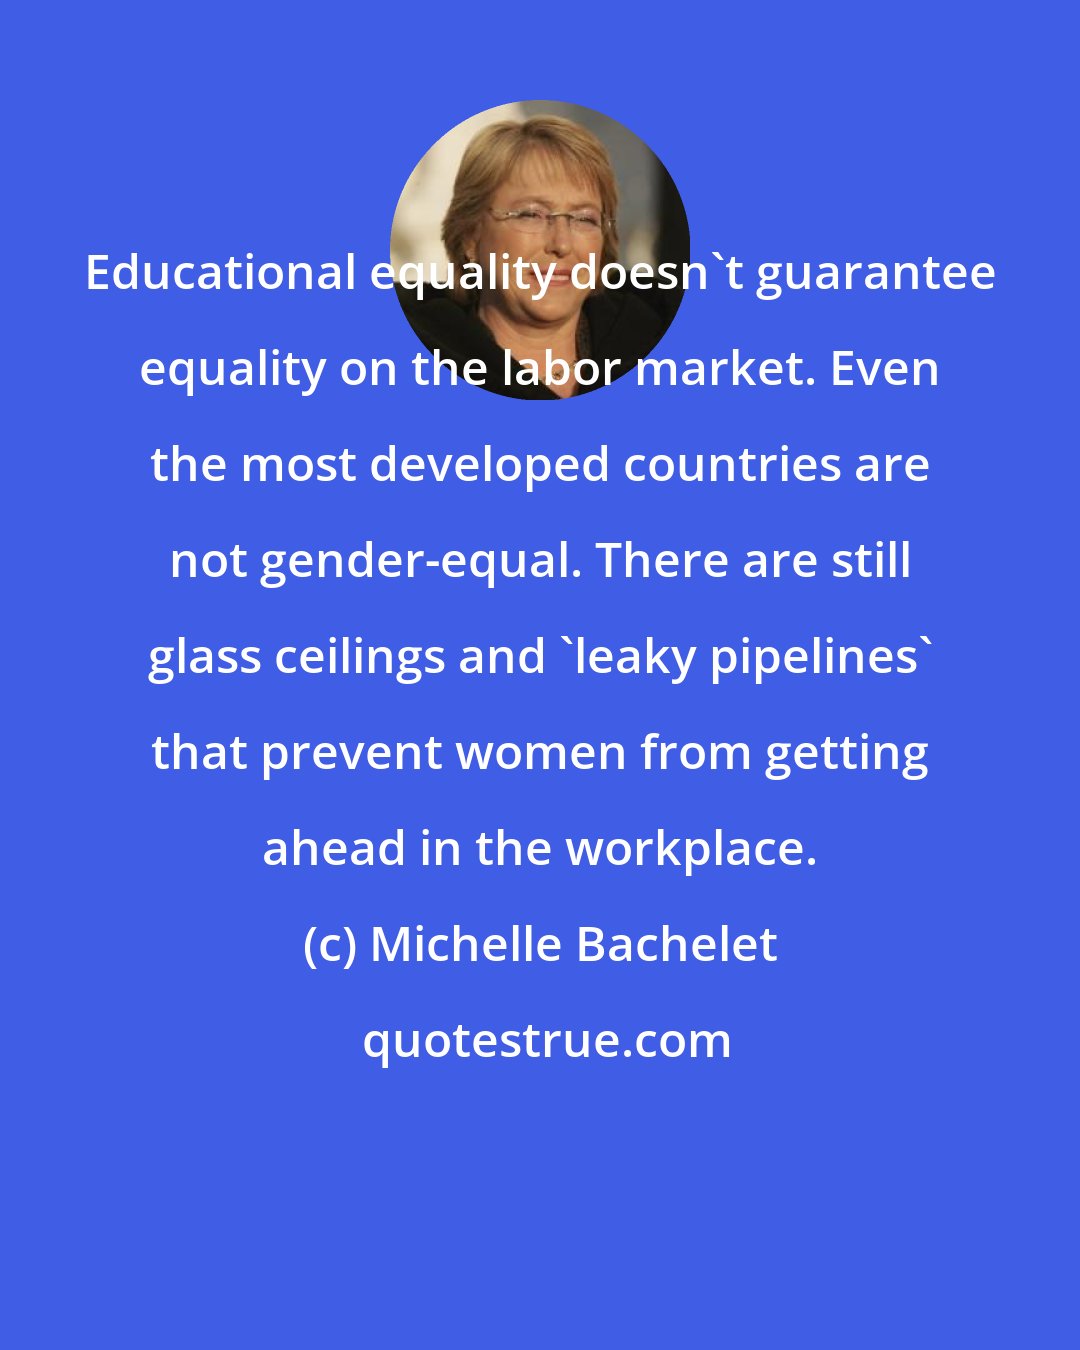 Michelle Bachelet: Educational equality doesn't guarantee equality on the labor market. Even the most developed countries are not gender-equal. There are still glass ceilings and 'leaky pipelines' that prevent women from getting ahead in the workplace.